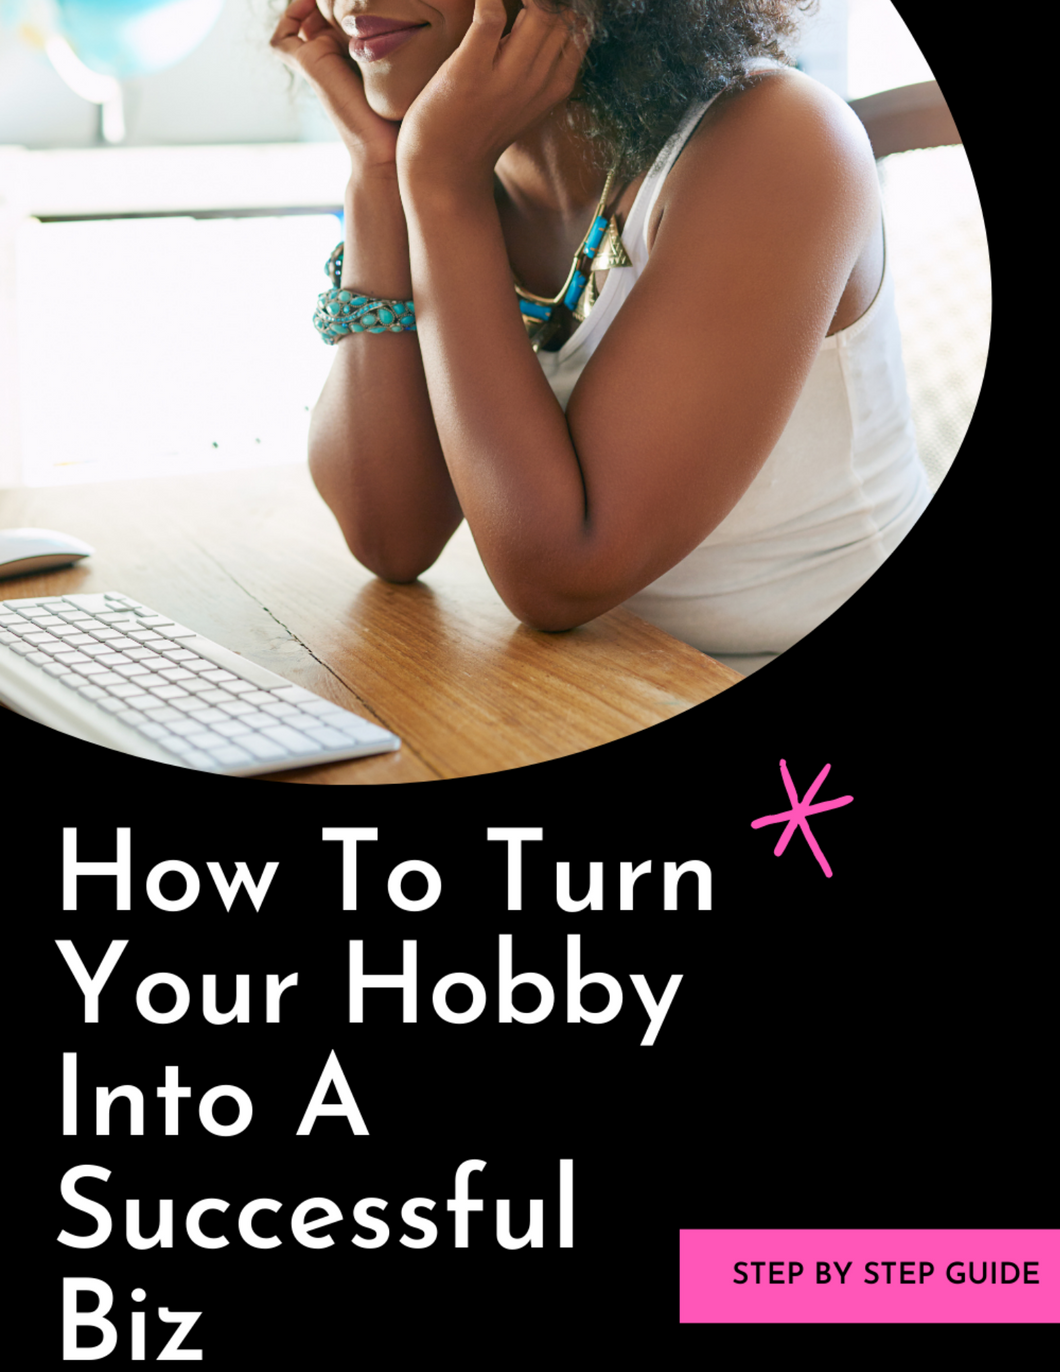 How To Turn Your Hobby Into A Successful Business